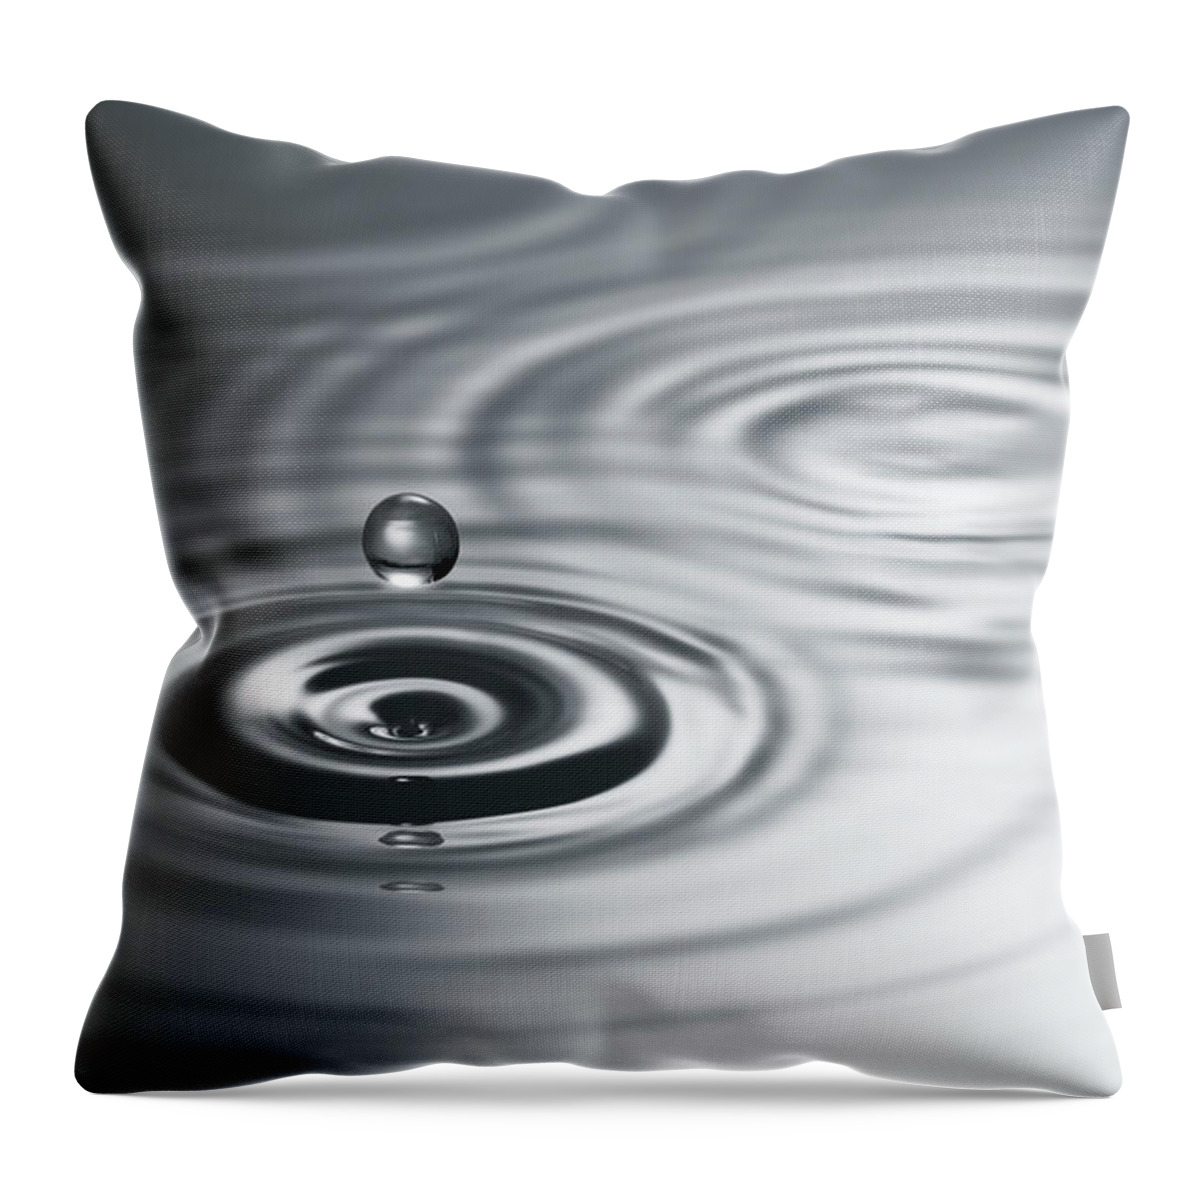 Tranquility Throw Pillow featuring the photograph Single Grey Drip On Rippled Surface by Anthony Bradshaw